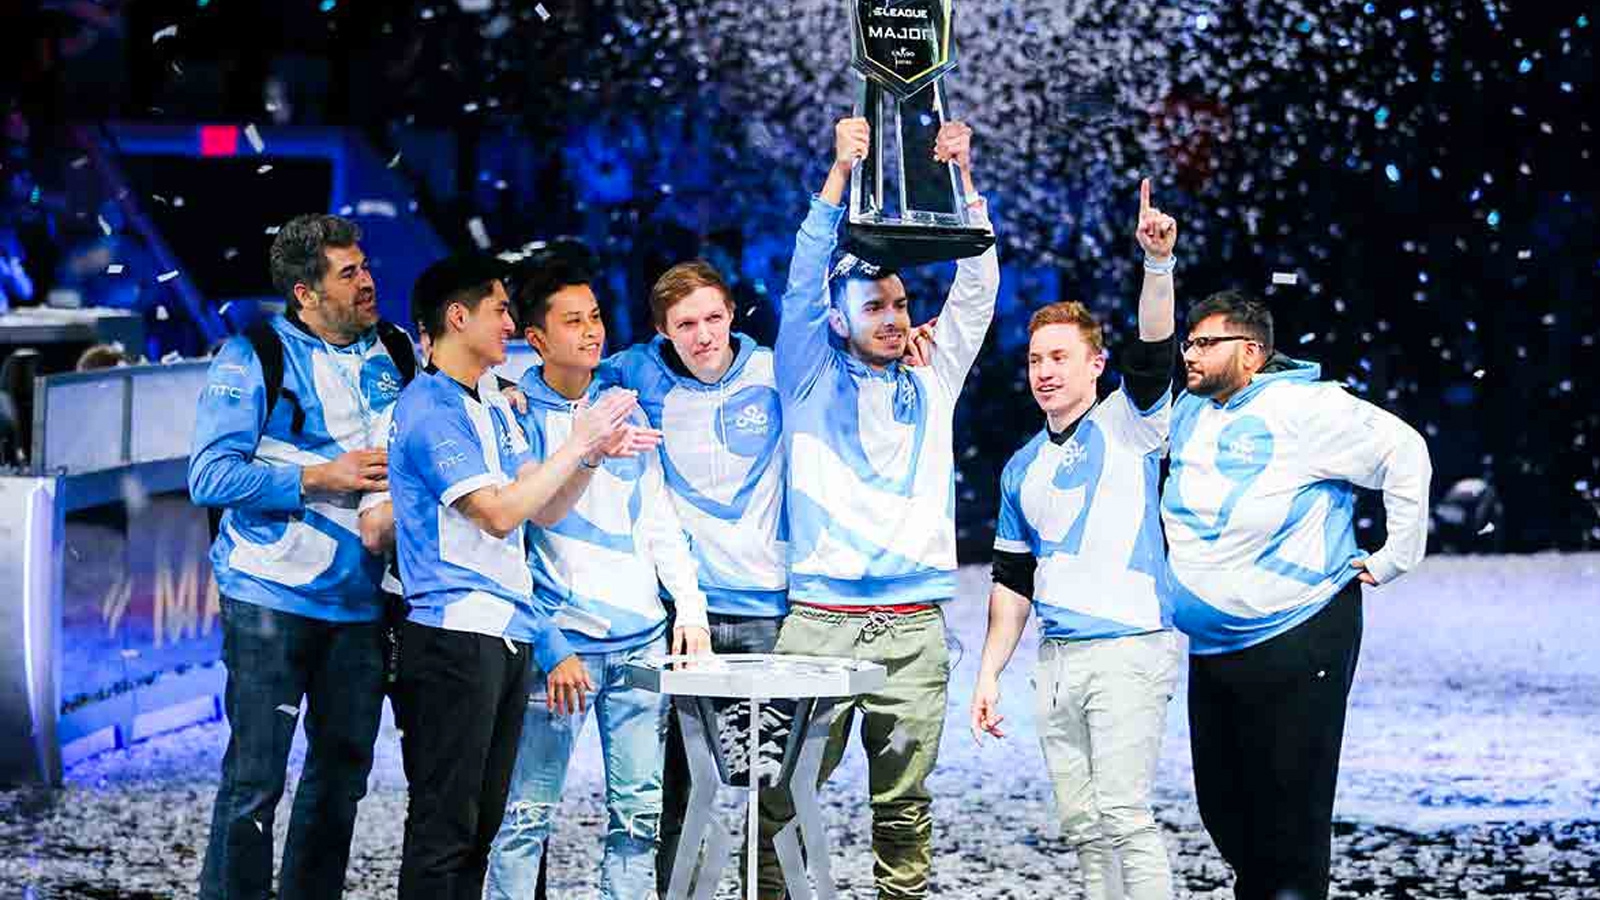 Core of Cloud9 gold roster might reunite